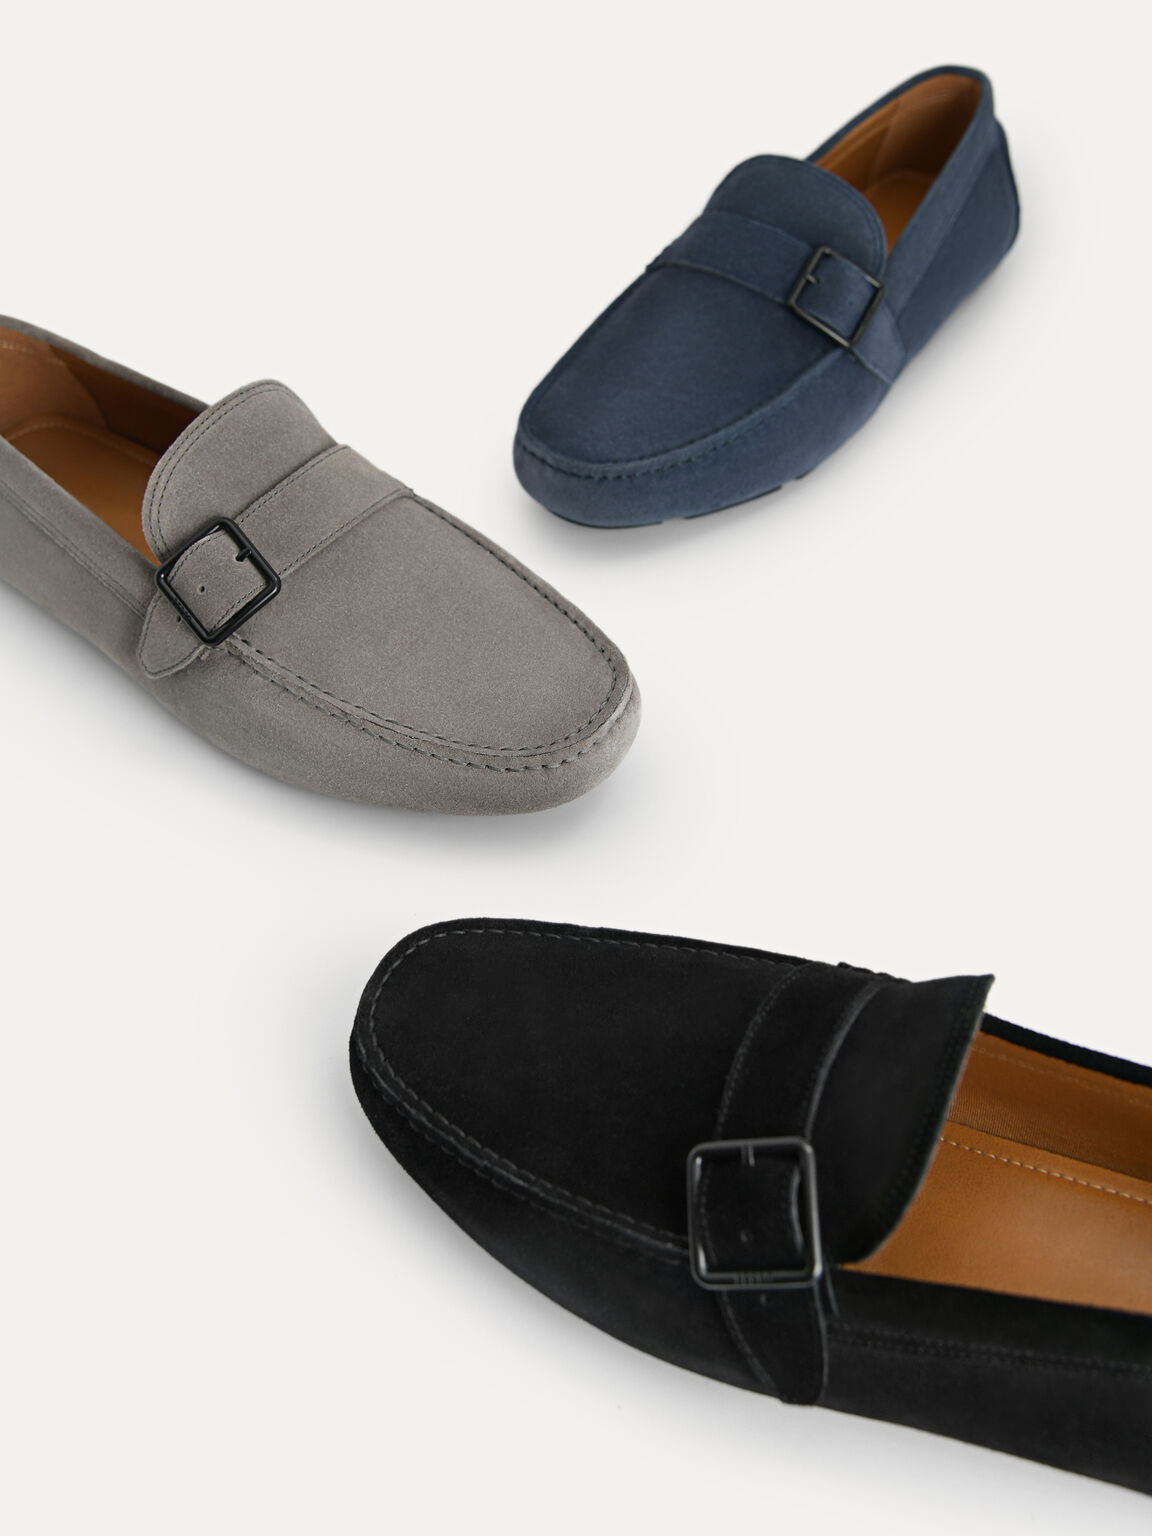 Suede Leather Moccasins with Buckle Detailing, Grey